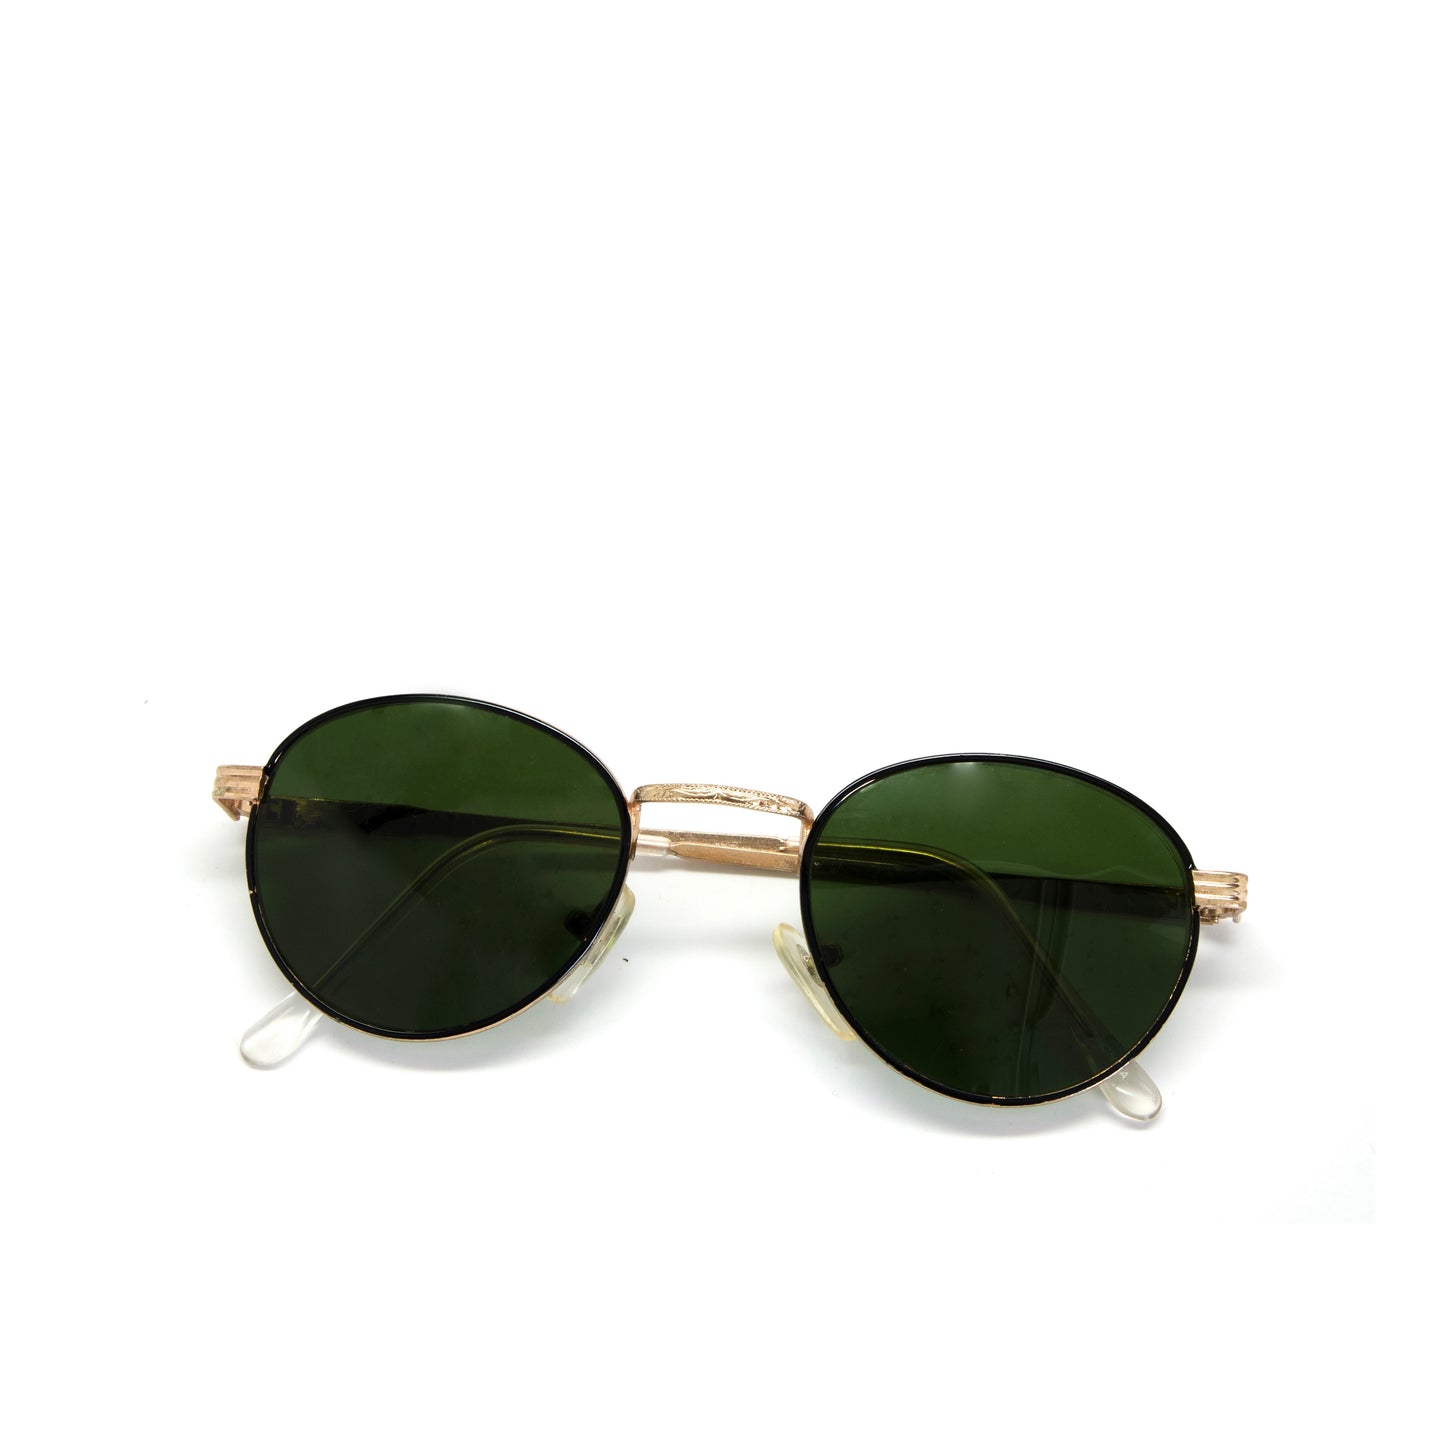 Vintage Standard Size Classic Circular Frame Deadstock Sunglasses - Gold